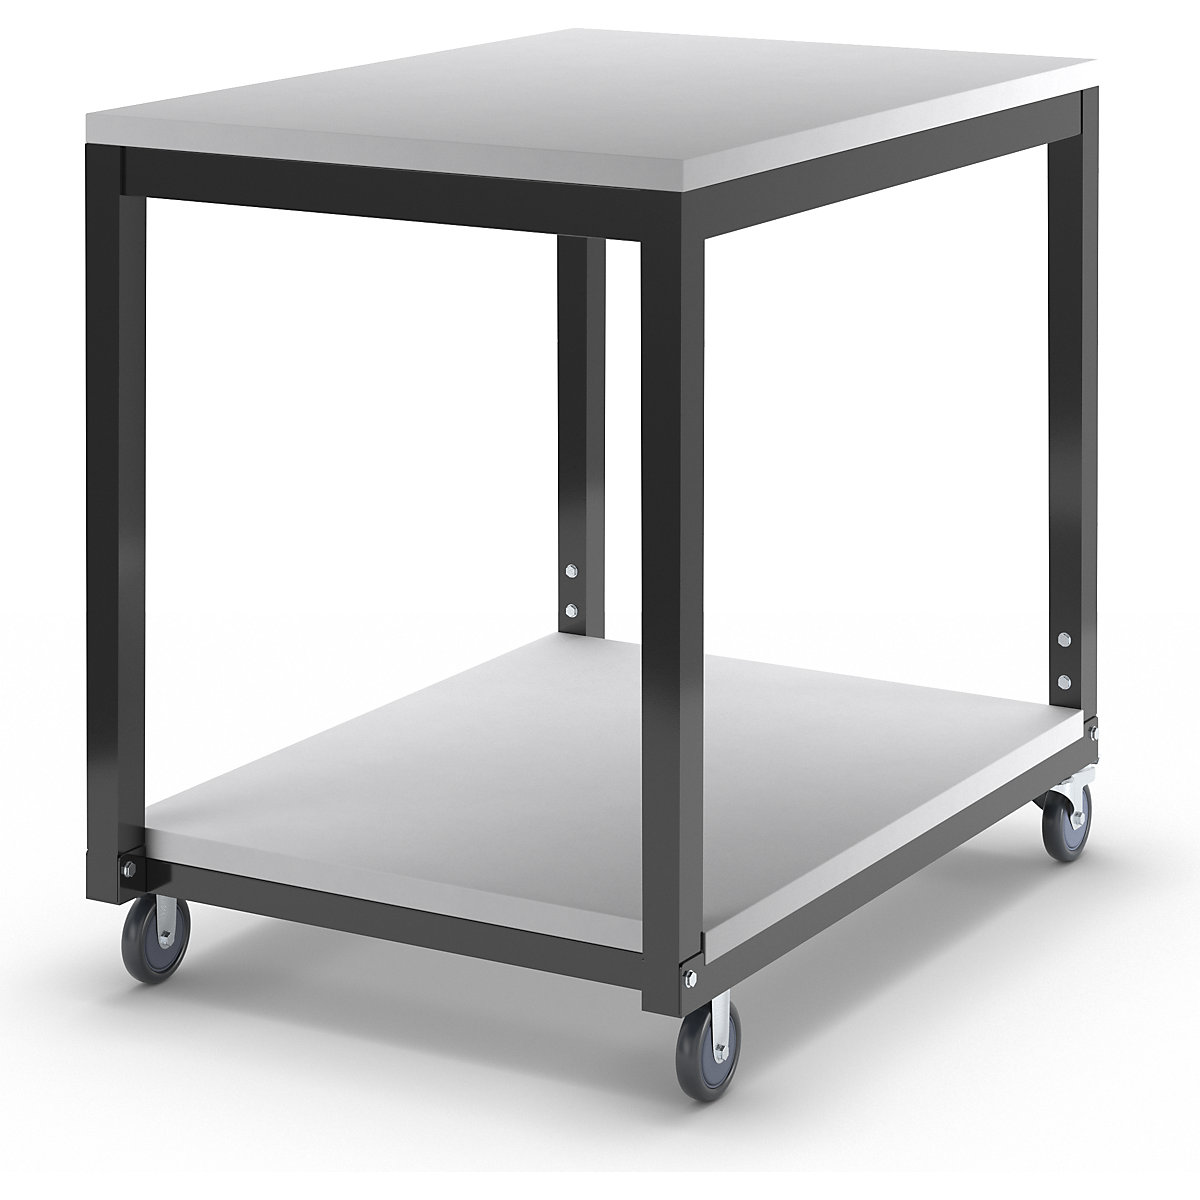 Table trolley with 2 shelves, height adjustable - eurokraft basic